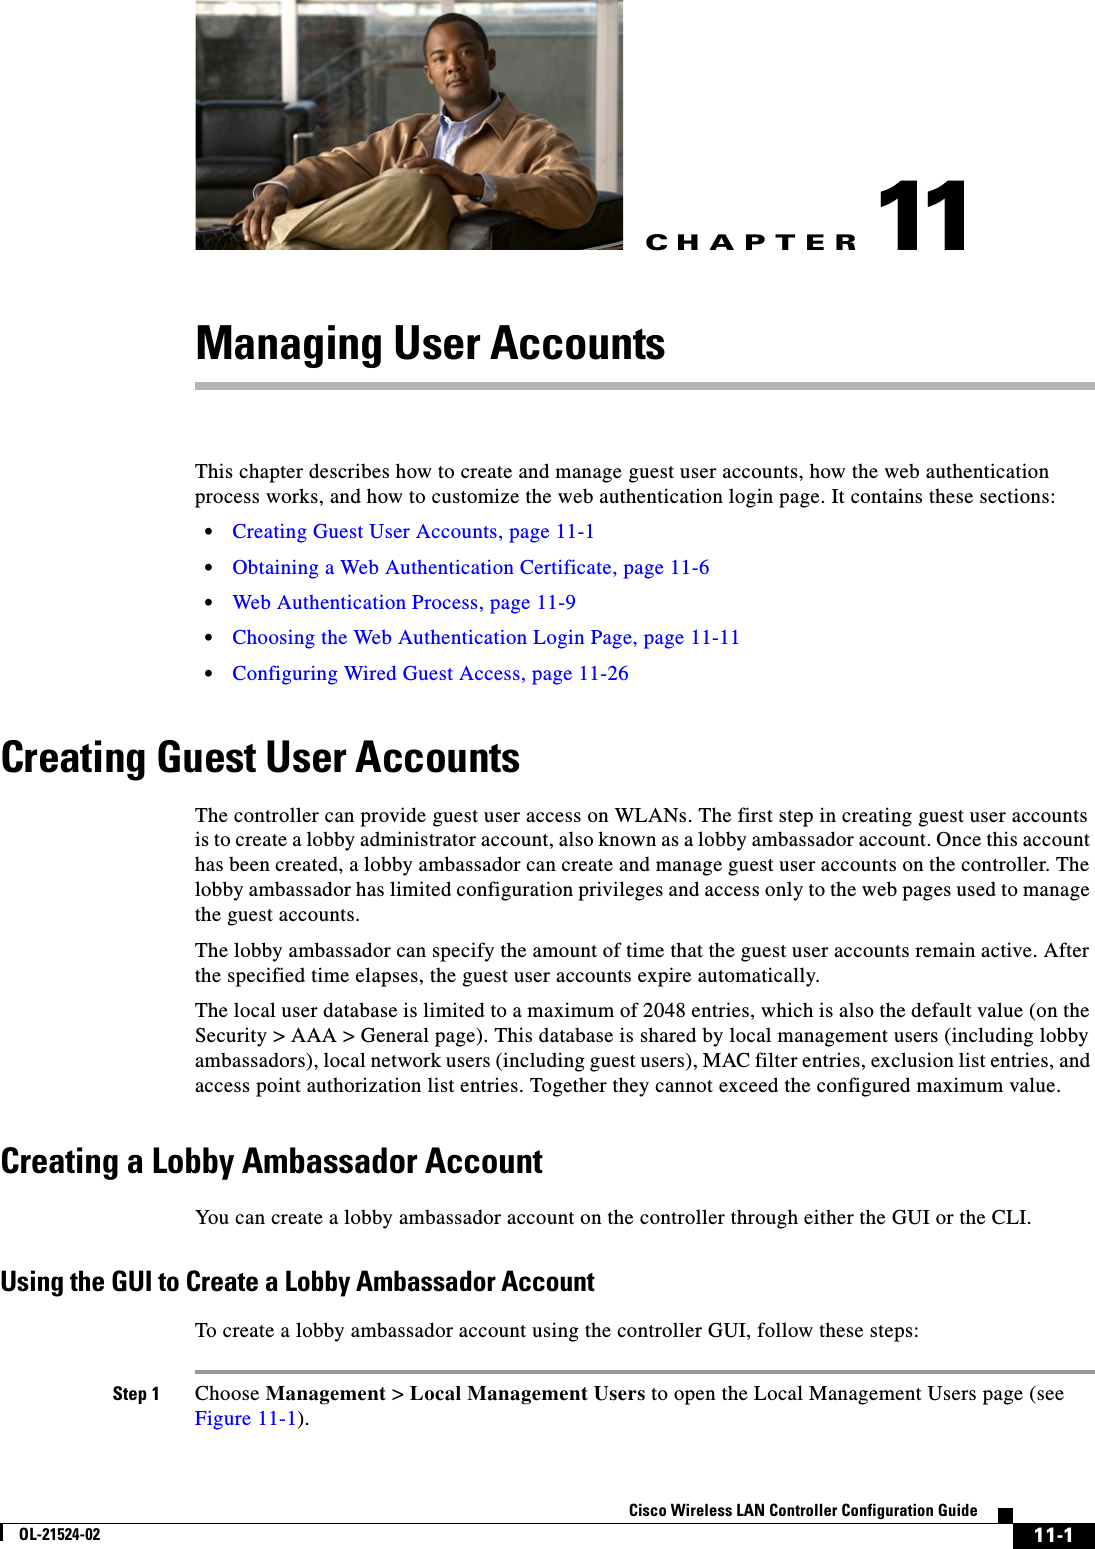 CHAPTER11-1Cisco Wireless LAN Controller Configuration GuideOL-21524-0211Managing User AccountsThis chapter describes how to create and manage guest user accounts, how the web authentication process works, and how to customize the web authentication login page. It contains these sections:  • Creating Guest User Accounts, page 11-1  • Obtaining a Web Authentication Certificate, page 11-6  • Web Authentication Process, page 11-9  • Choosing the Web Authentication Login Page, page 11-11  • Configuring Wired Guest Access, page 11-26Creating Guest User AccountsThe controller can provide guest user access on WLANs. The first step in creating guest user accounts is to create a lobby administrator account, also known as a lobby ambassador account. Once this account has been created, a lobby ambassador can create and manage guest user accounts on the controller. The lobby ambassador has limited configuration privileges and access only to the web pages used to manage the guest accounts.The lobby ambassador can specify the amount of time that the guest user accounts remain active. After the specified time elapses, the guest user accounts expire automatically.The local user database is limited to a maximum of 2048 entries, which is also the default value (on the Security &gt; AAA &gt; General page). This database is shared by local management users (including lobby ambassadors), local network users (including guest users), MAC filter entries, exclusion list entries, and access point authorization list entries. Together they cannot exceed the configured maximum value.Creating a Lobby Ambassador AccountYou can create a lobby ambassador account on the controller through either the GUI or the CLI.Using the GUI to Create a Lobby Ambassador AccountTo create a lobby ambassador account using the controller GUI, follow these steps:Step 1 Choose Management &gt; Local Management Users to open the Local Management Users page (see Figure 11-1).